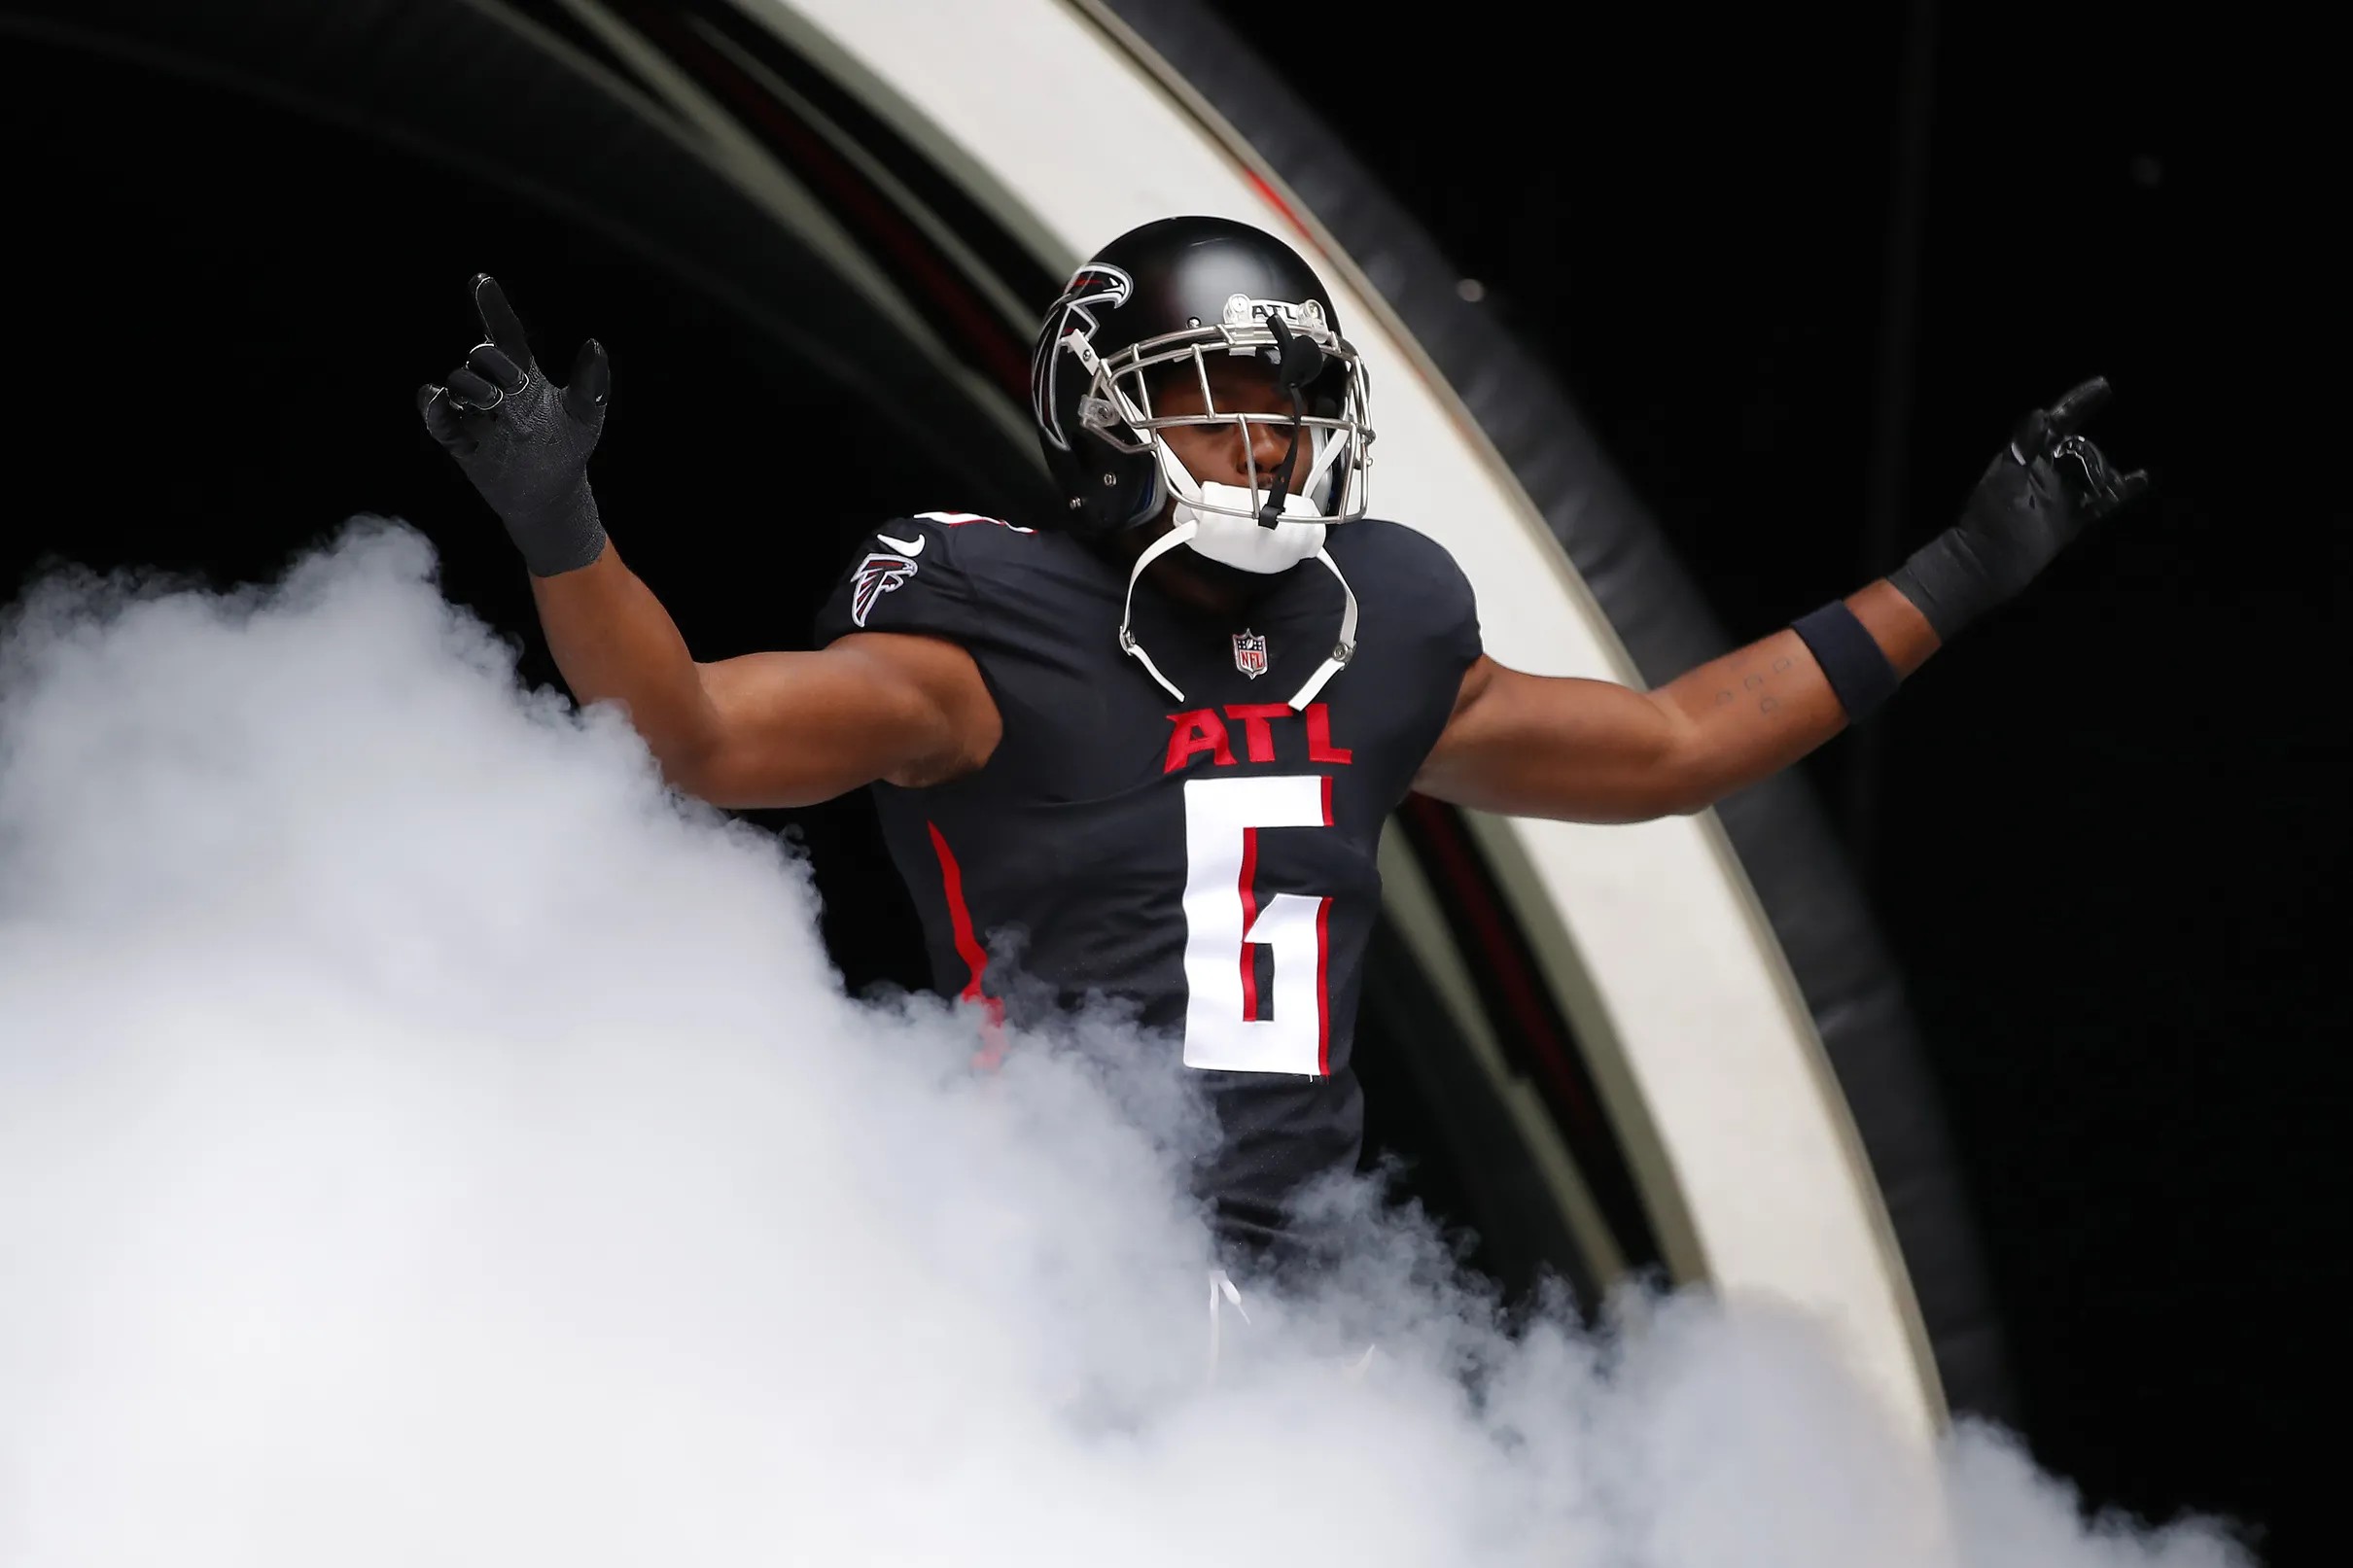 Falcons 2021 jersey schedule revealed - The Falcoholic